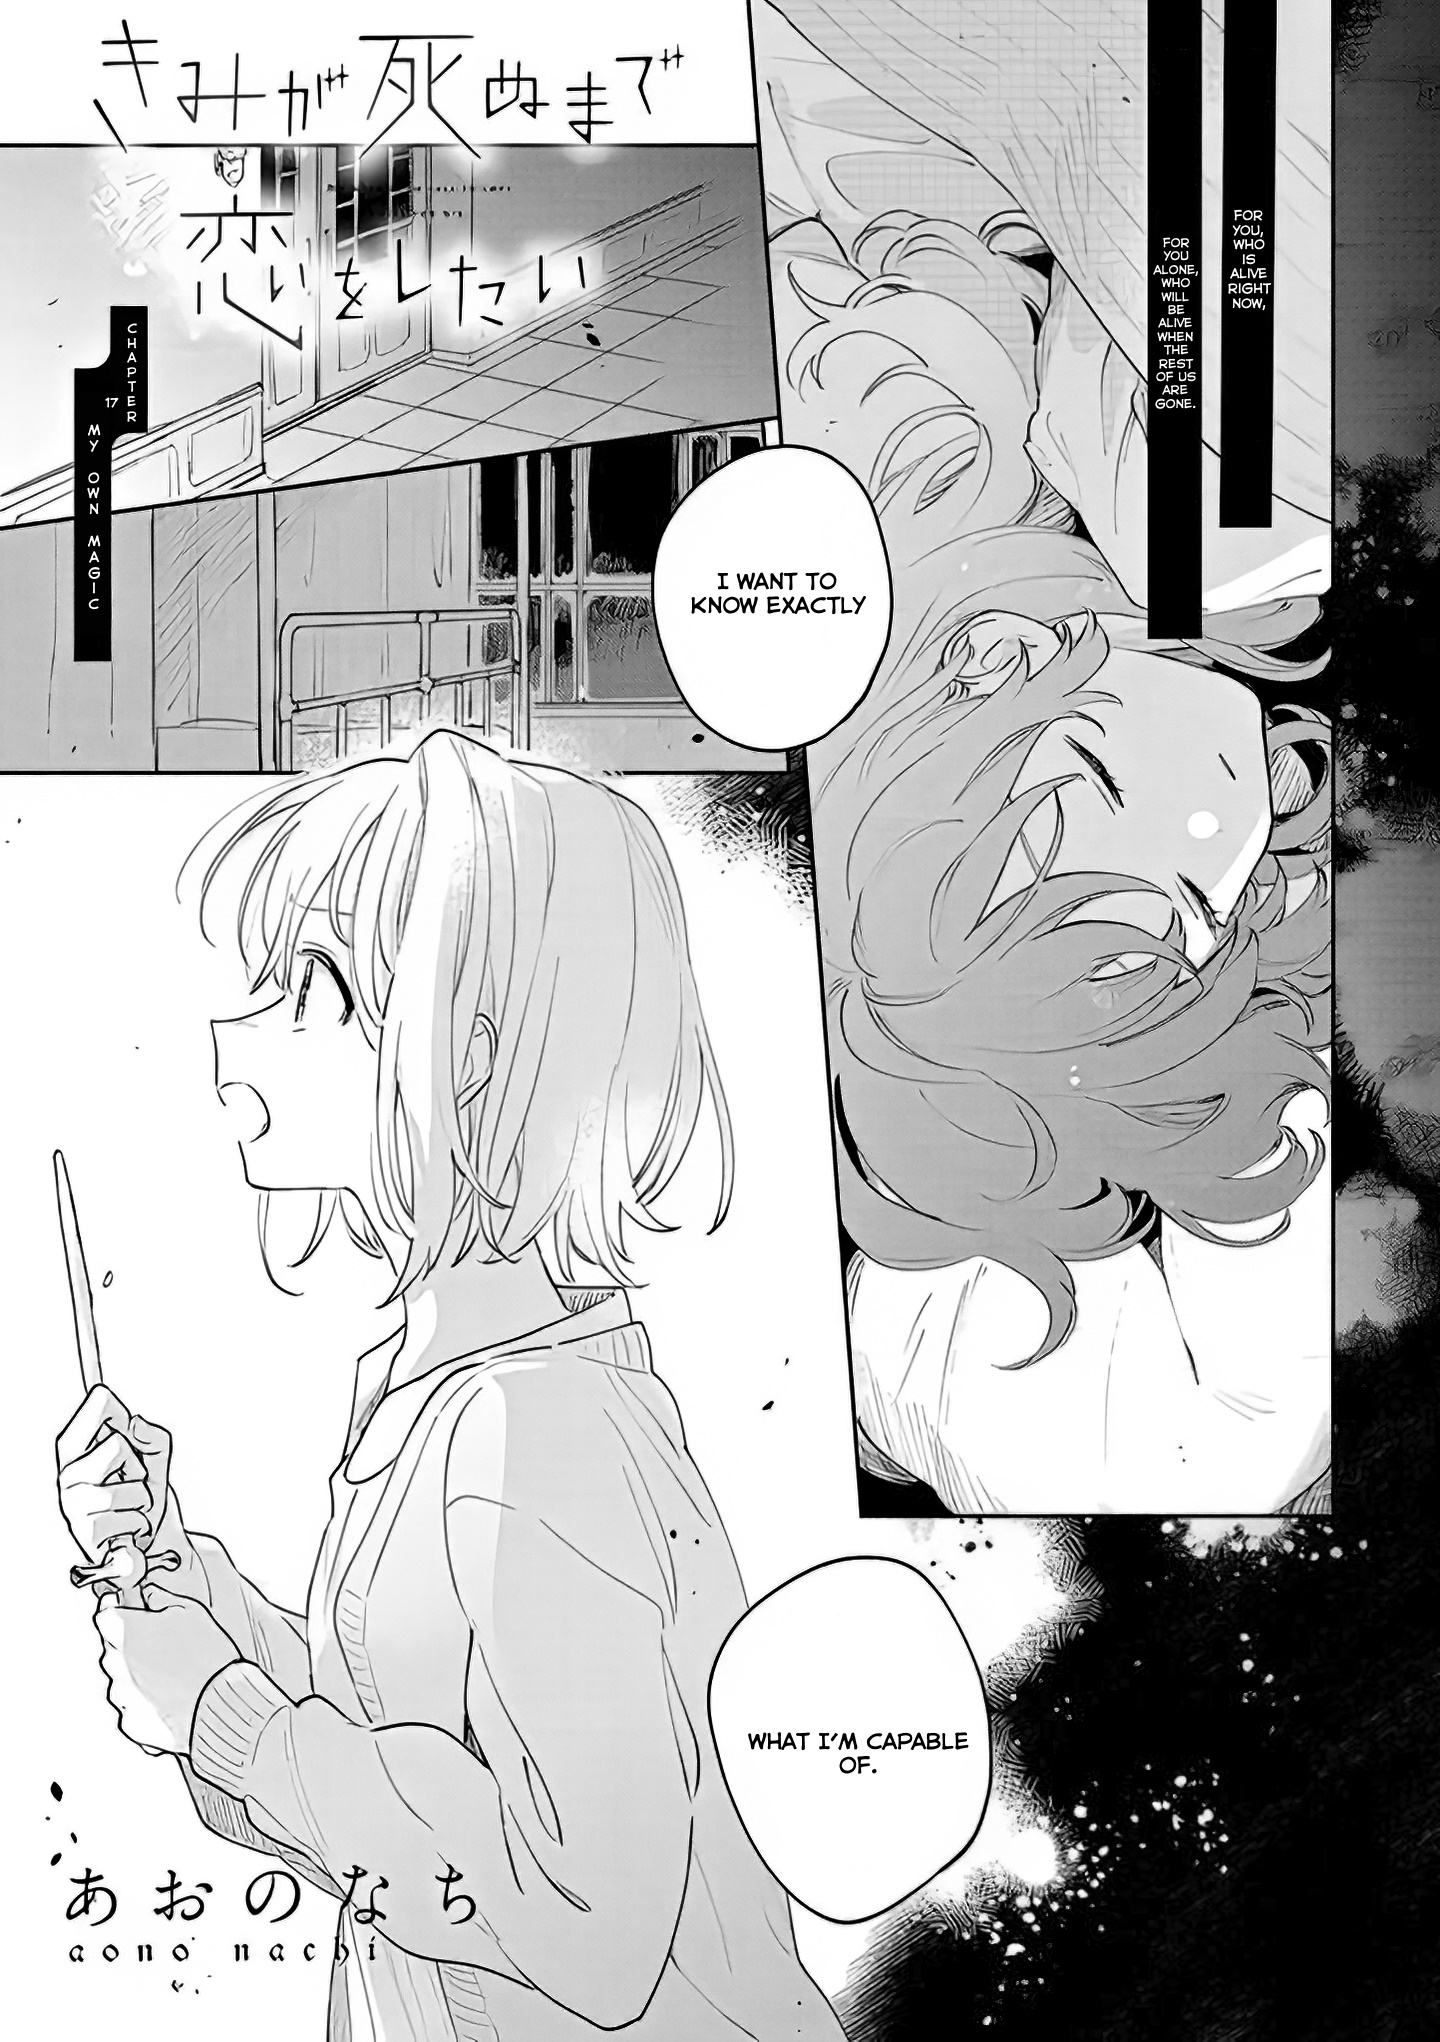 My Wish Is To Fall In Love Until You Die - Page 1